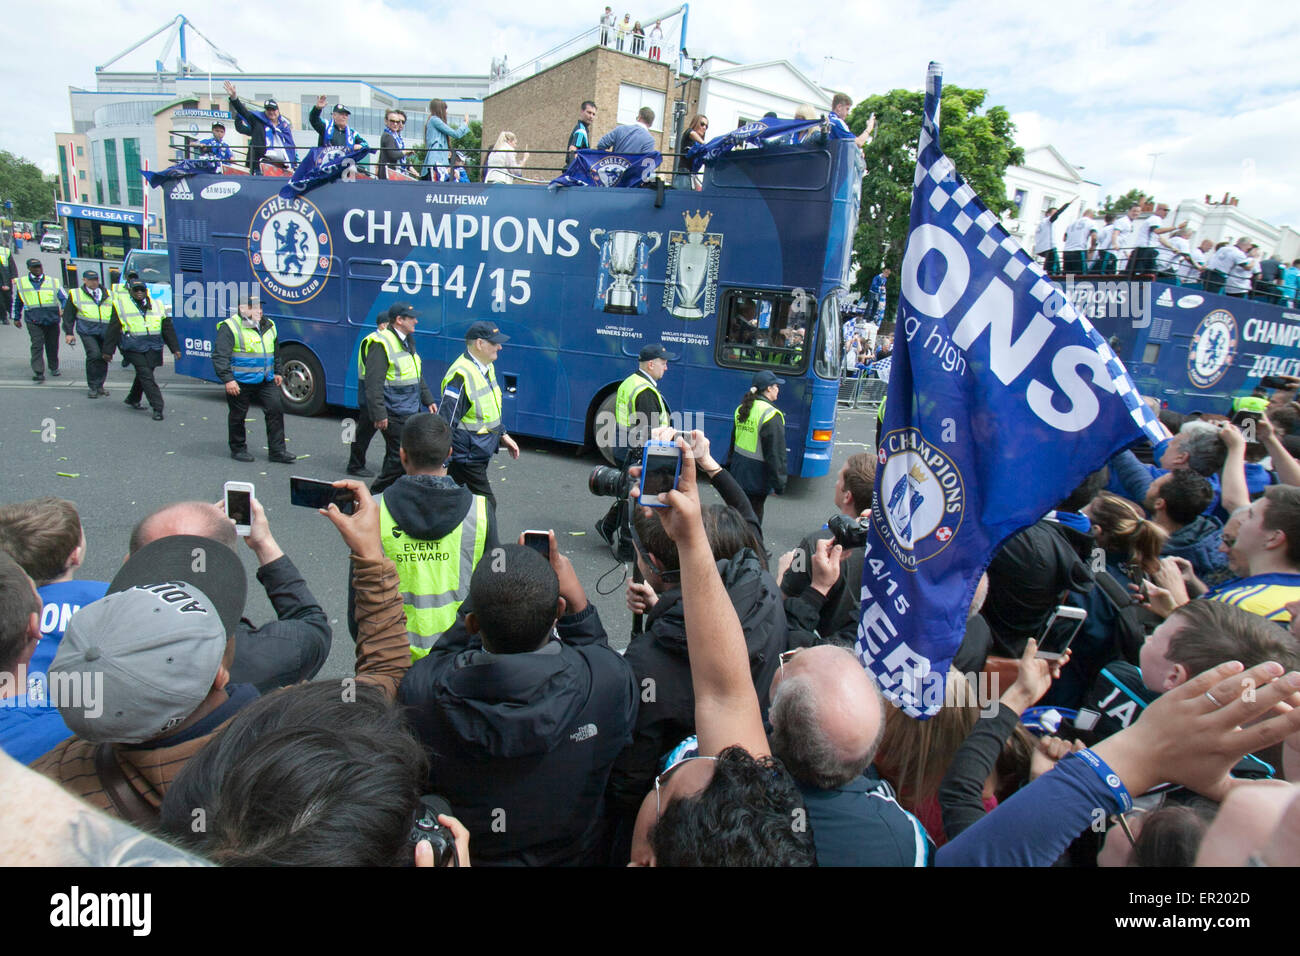 London, UK. 25th May 2015. Chelsea Football players left Stamford Bridge for a victory parade on double decker buses welcomed by thousands of jubilant supporters after winning the 2015 English Premier League Credit:  amer ghazzal/Alamy Live News Stock Photo